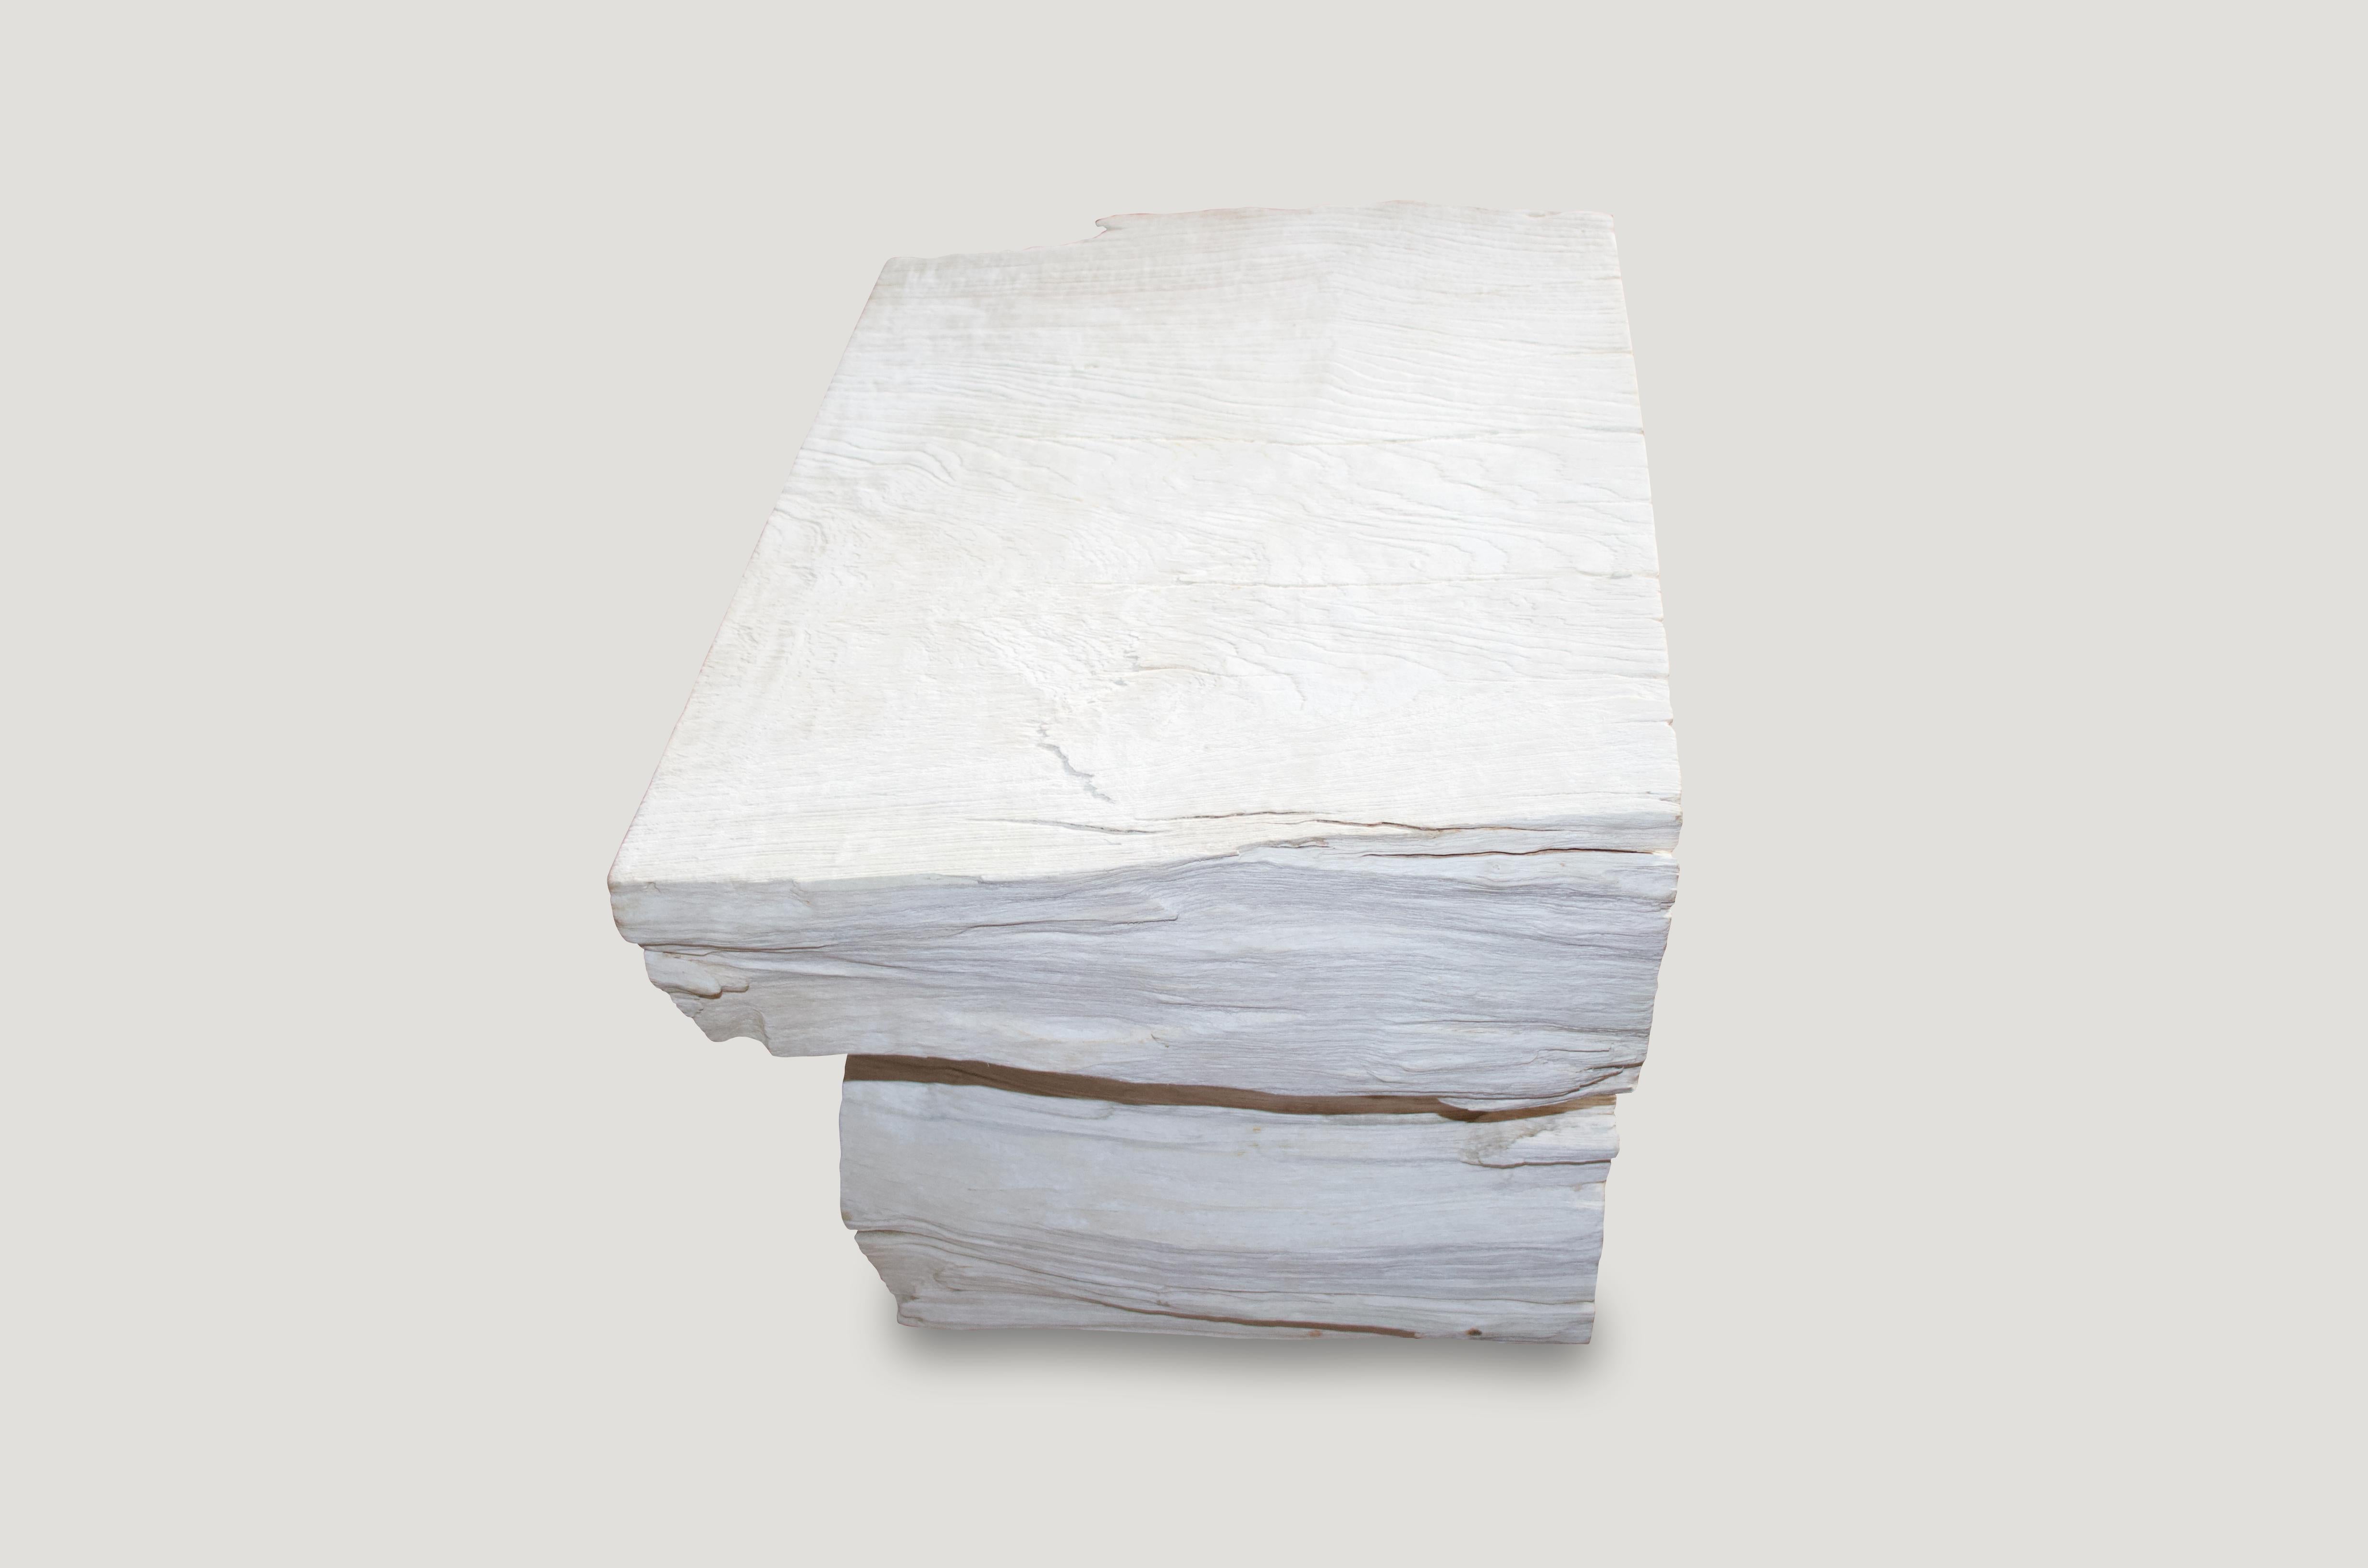 Reclaimed bleached teak wood organic coffee table or side table with beautiful erosion on the ends. Perfect for inside or outside living.

The St. Barts collection features an exciting new line of organic white wash, bleached and natural weathered